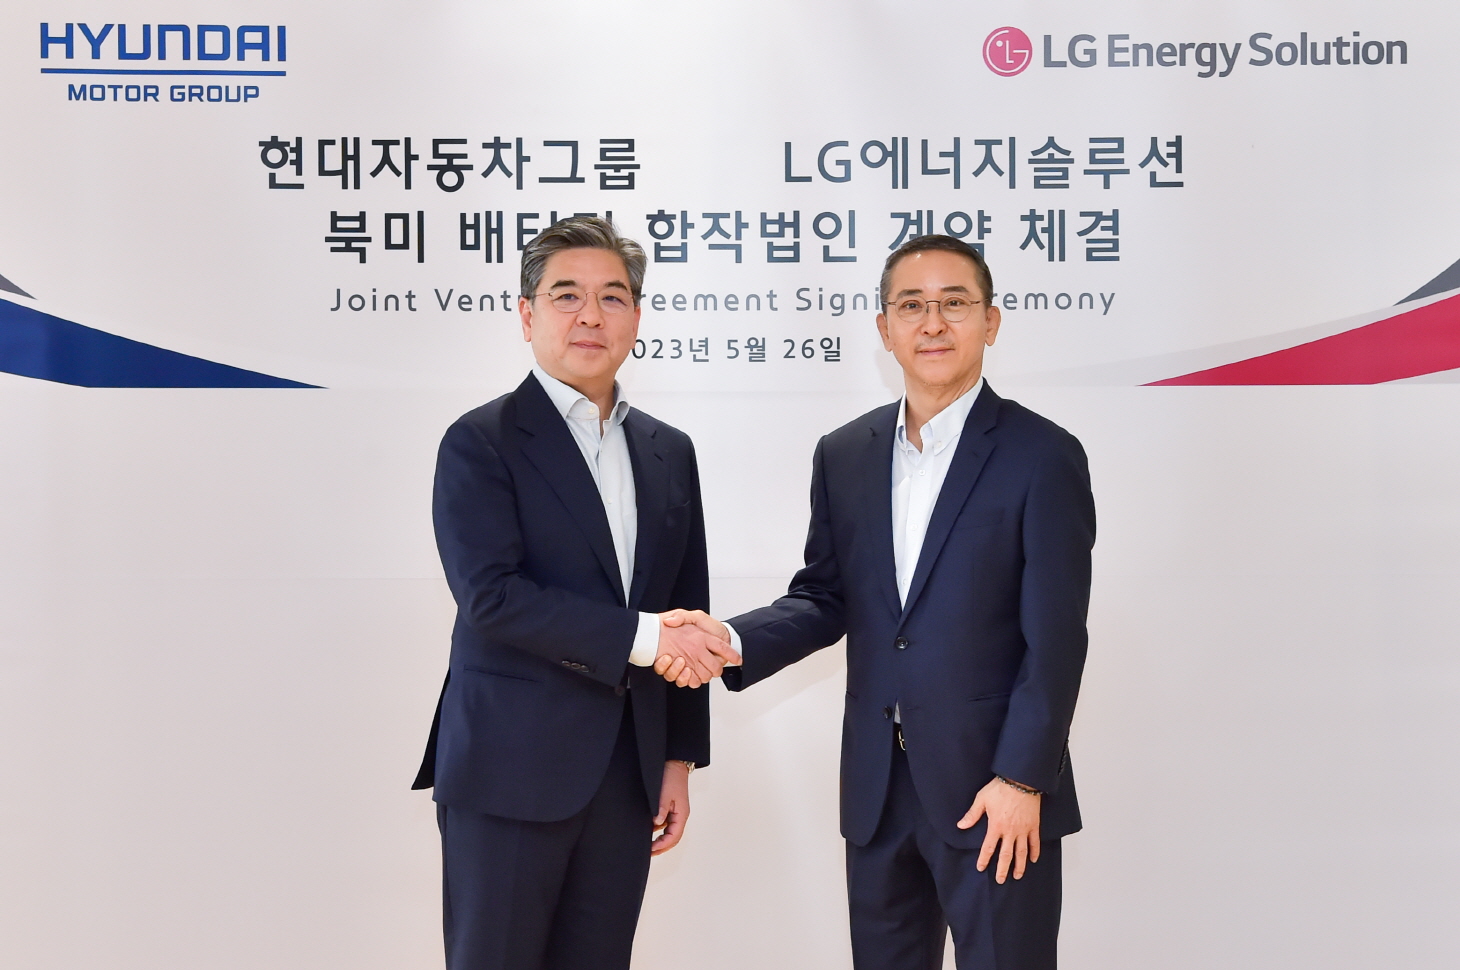 lg-energy-solution-and-hyundai-motor-group-to-establish-battery-cell-manufacturing-joint-venture-in-the-u-s_1.jpg